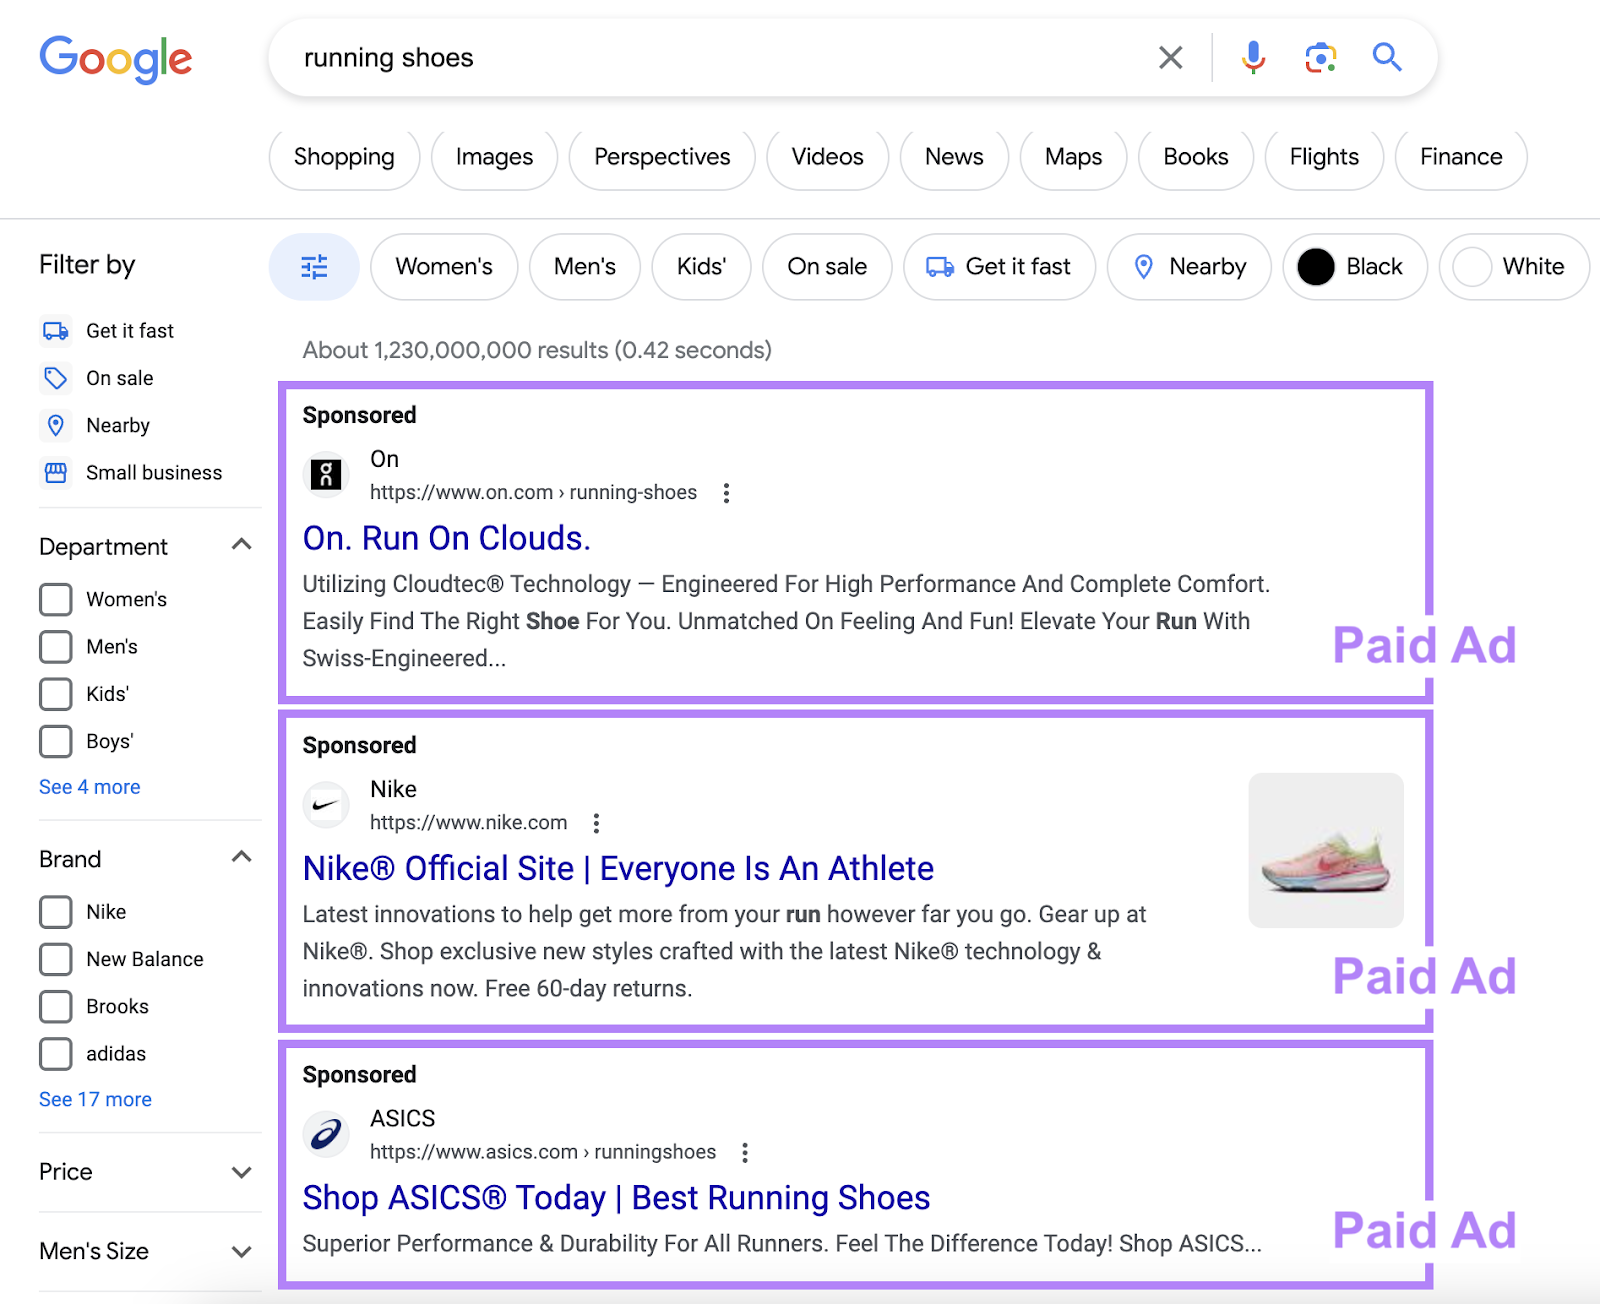 Paid search ads on Google's SERP for "running shoes" query